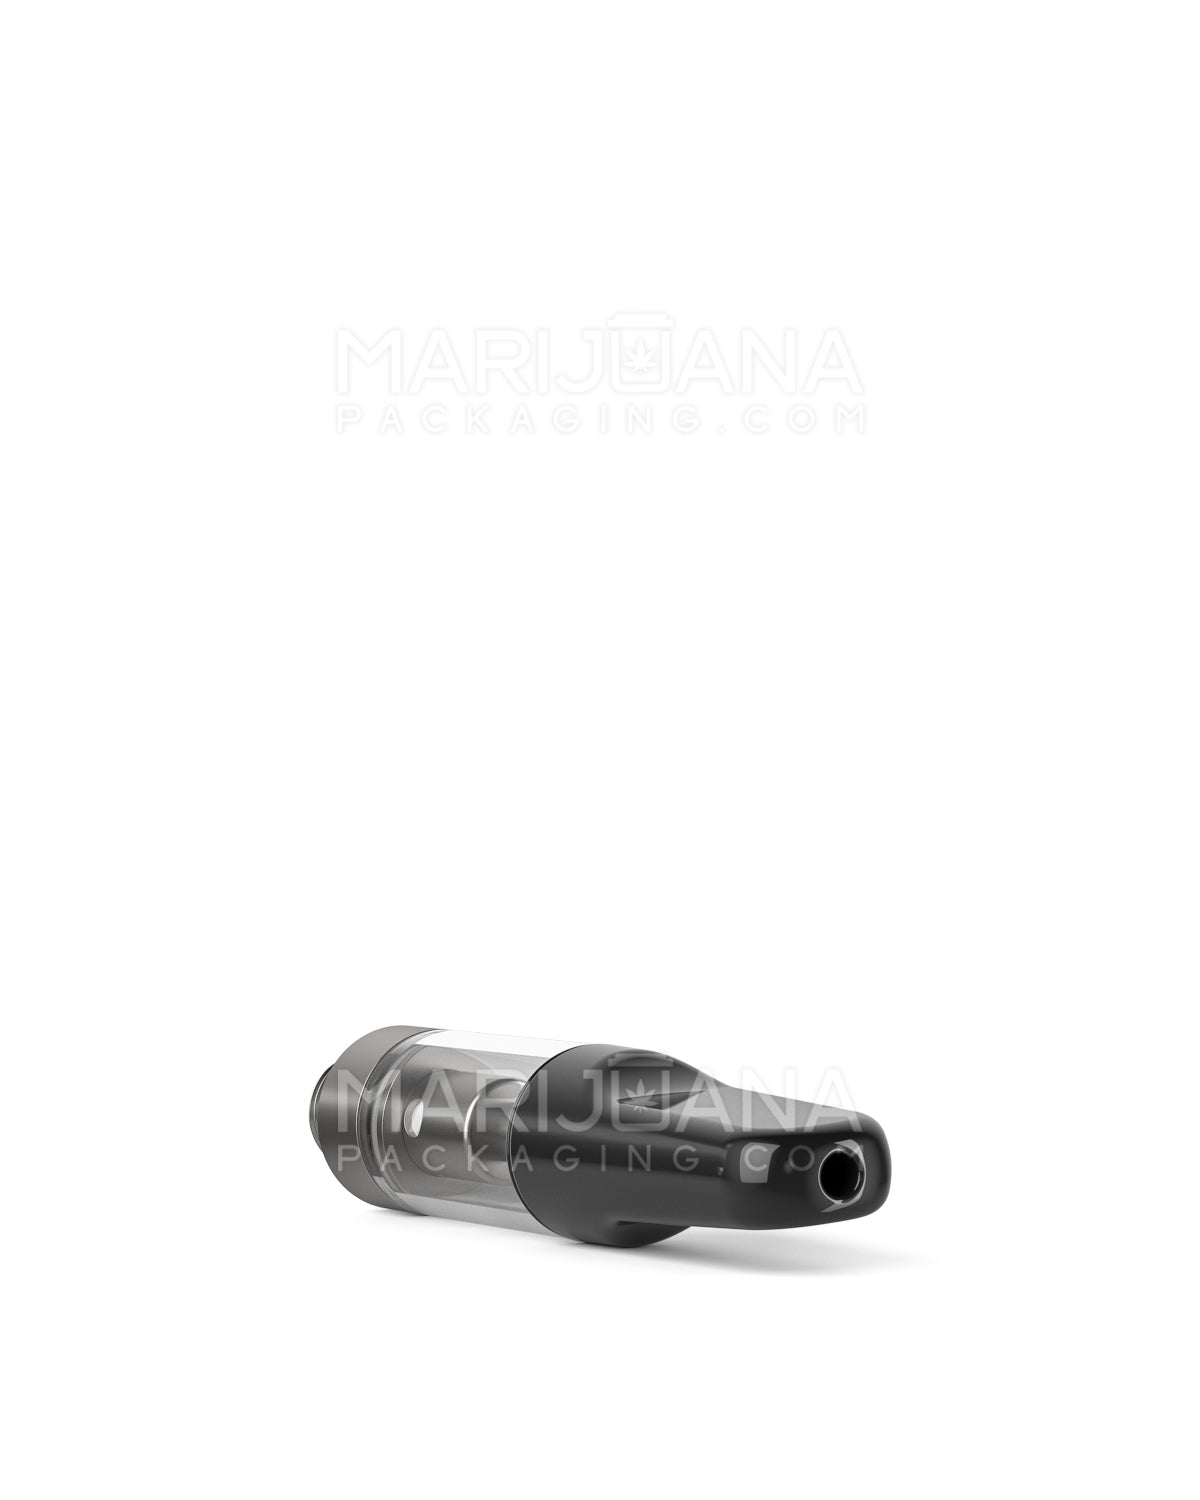 CCELL | Liquid6 Reactor Glass Vape Cartridge with Black Ceramic Mouthpiece | 0.5mL - Screw On - 100 Count - 7